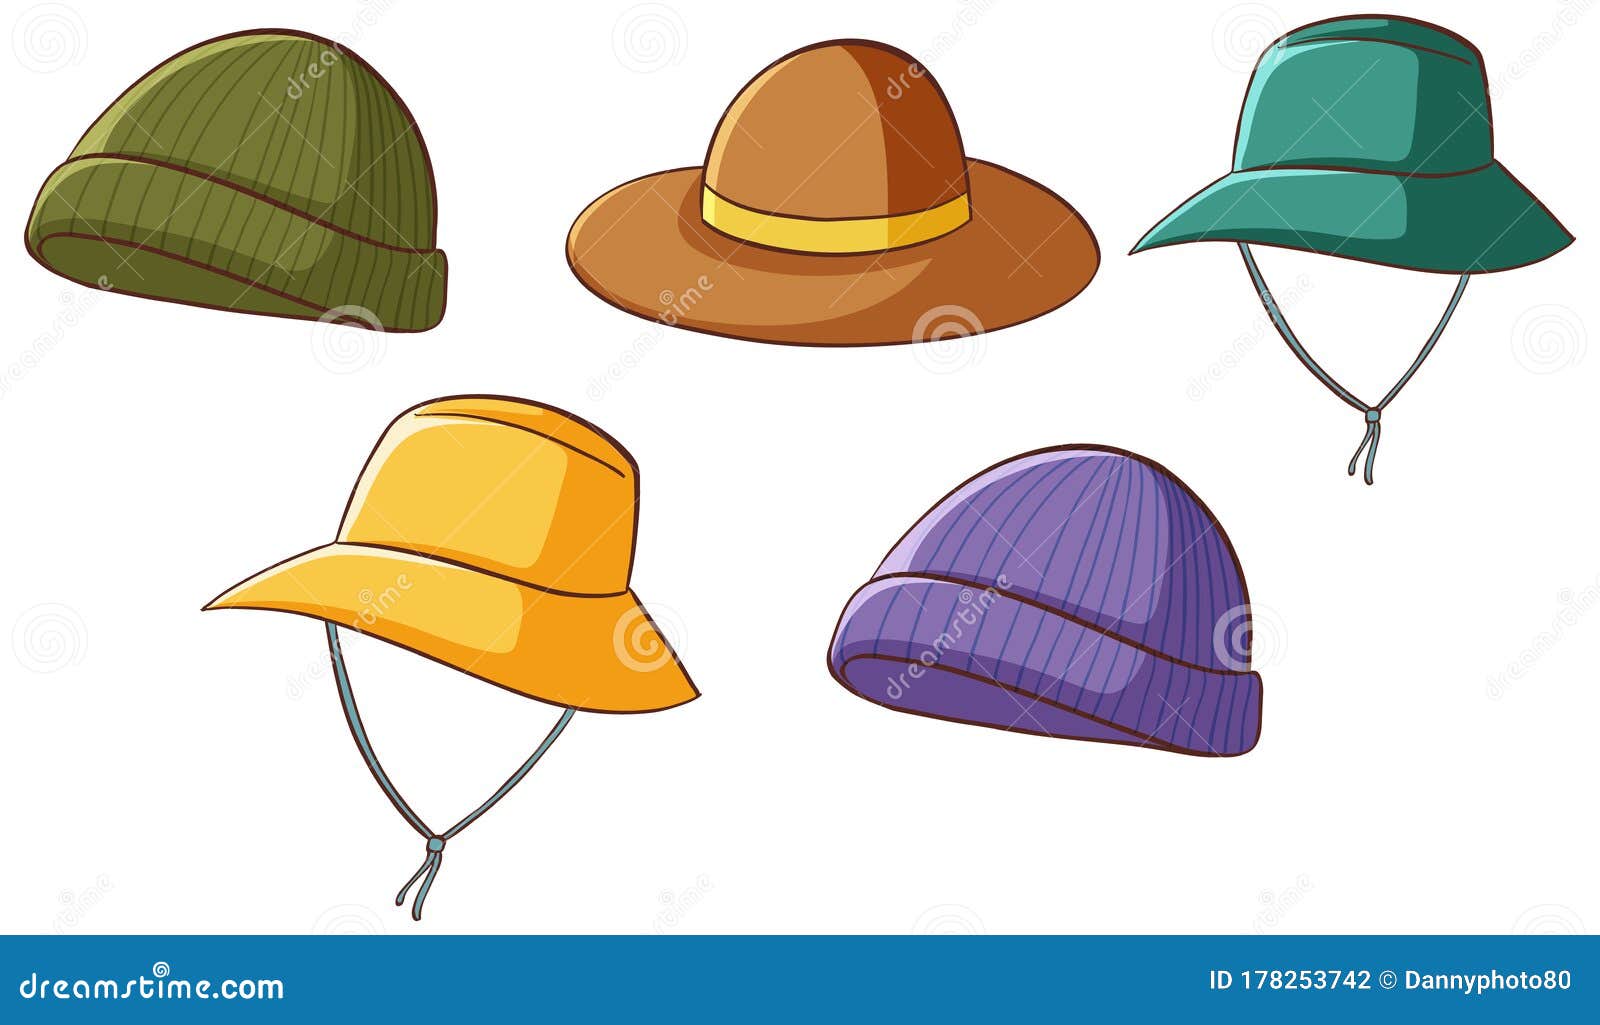 Set of isolated hats stock illustration. Illustration of collection ...